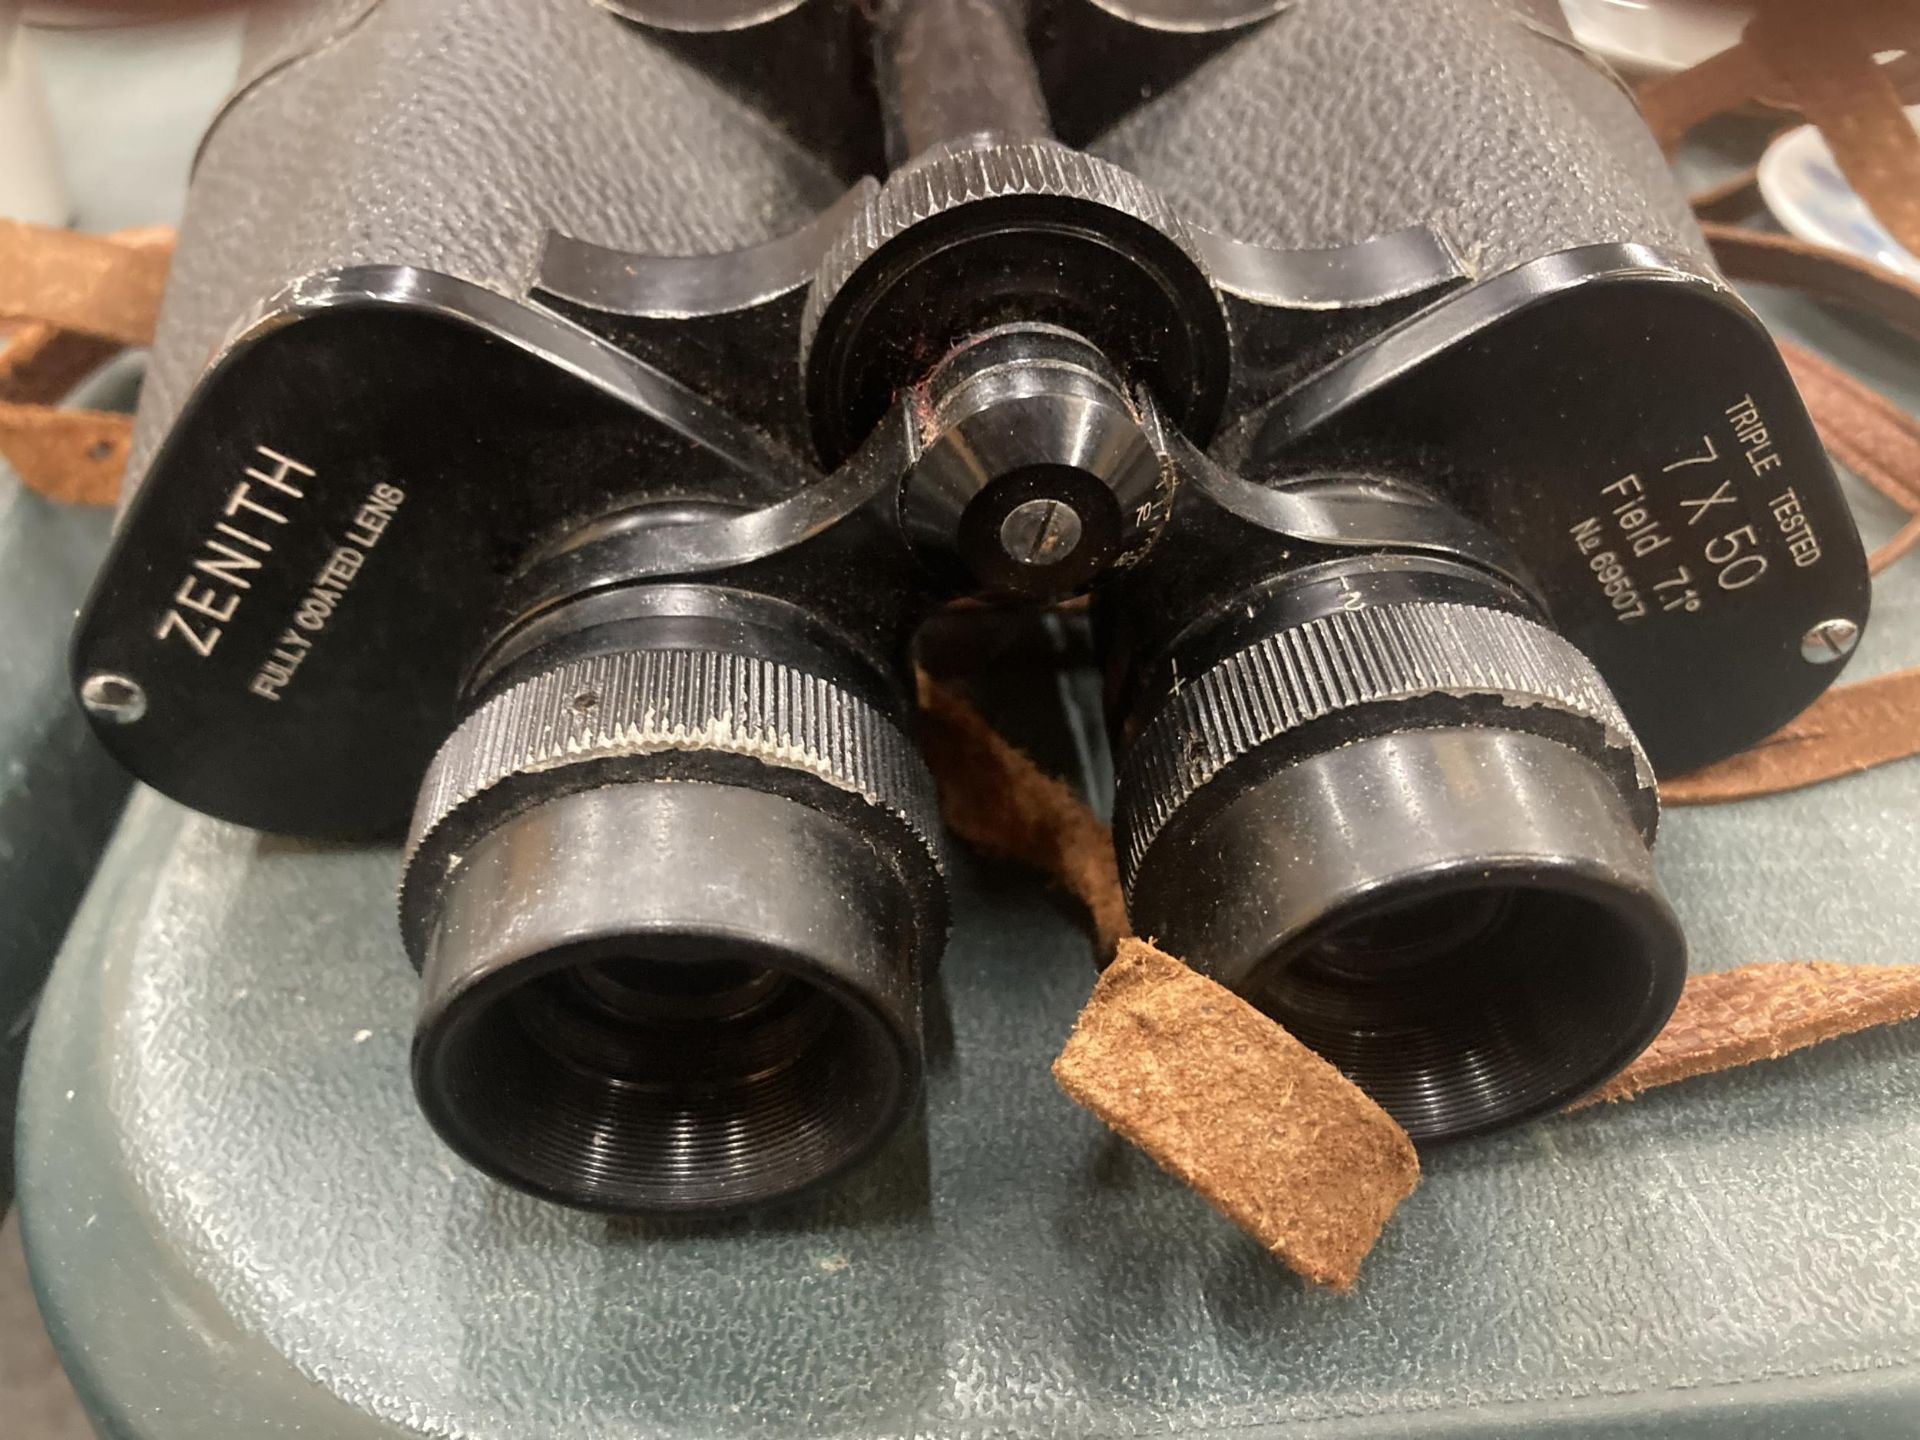 A PAIR OF ZENITH 7 X 50 FIELD BINOCULARS IN A LEATHER CASE - Image 2 of 5